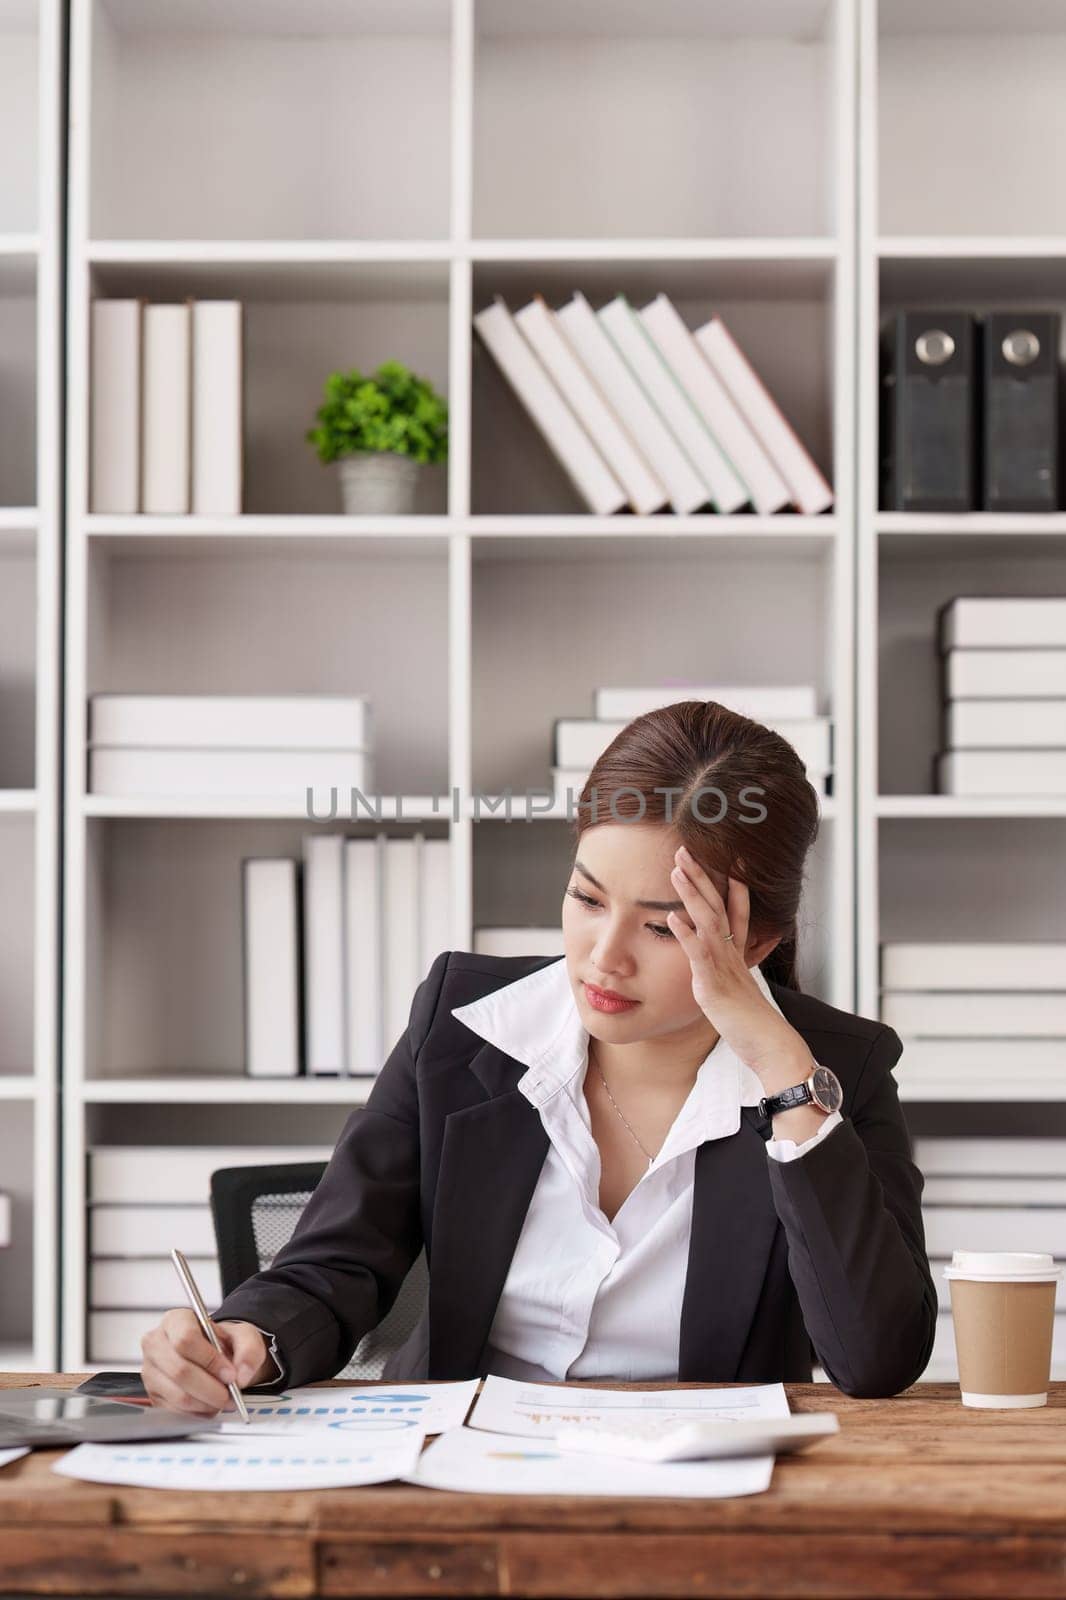 Employee feeling tired stressed with her work in the office, sad working woman overworked overtime, business woman upset with financial document.